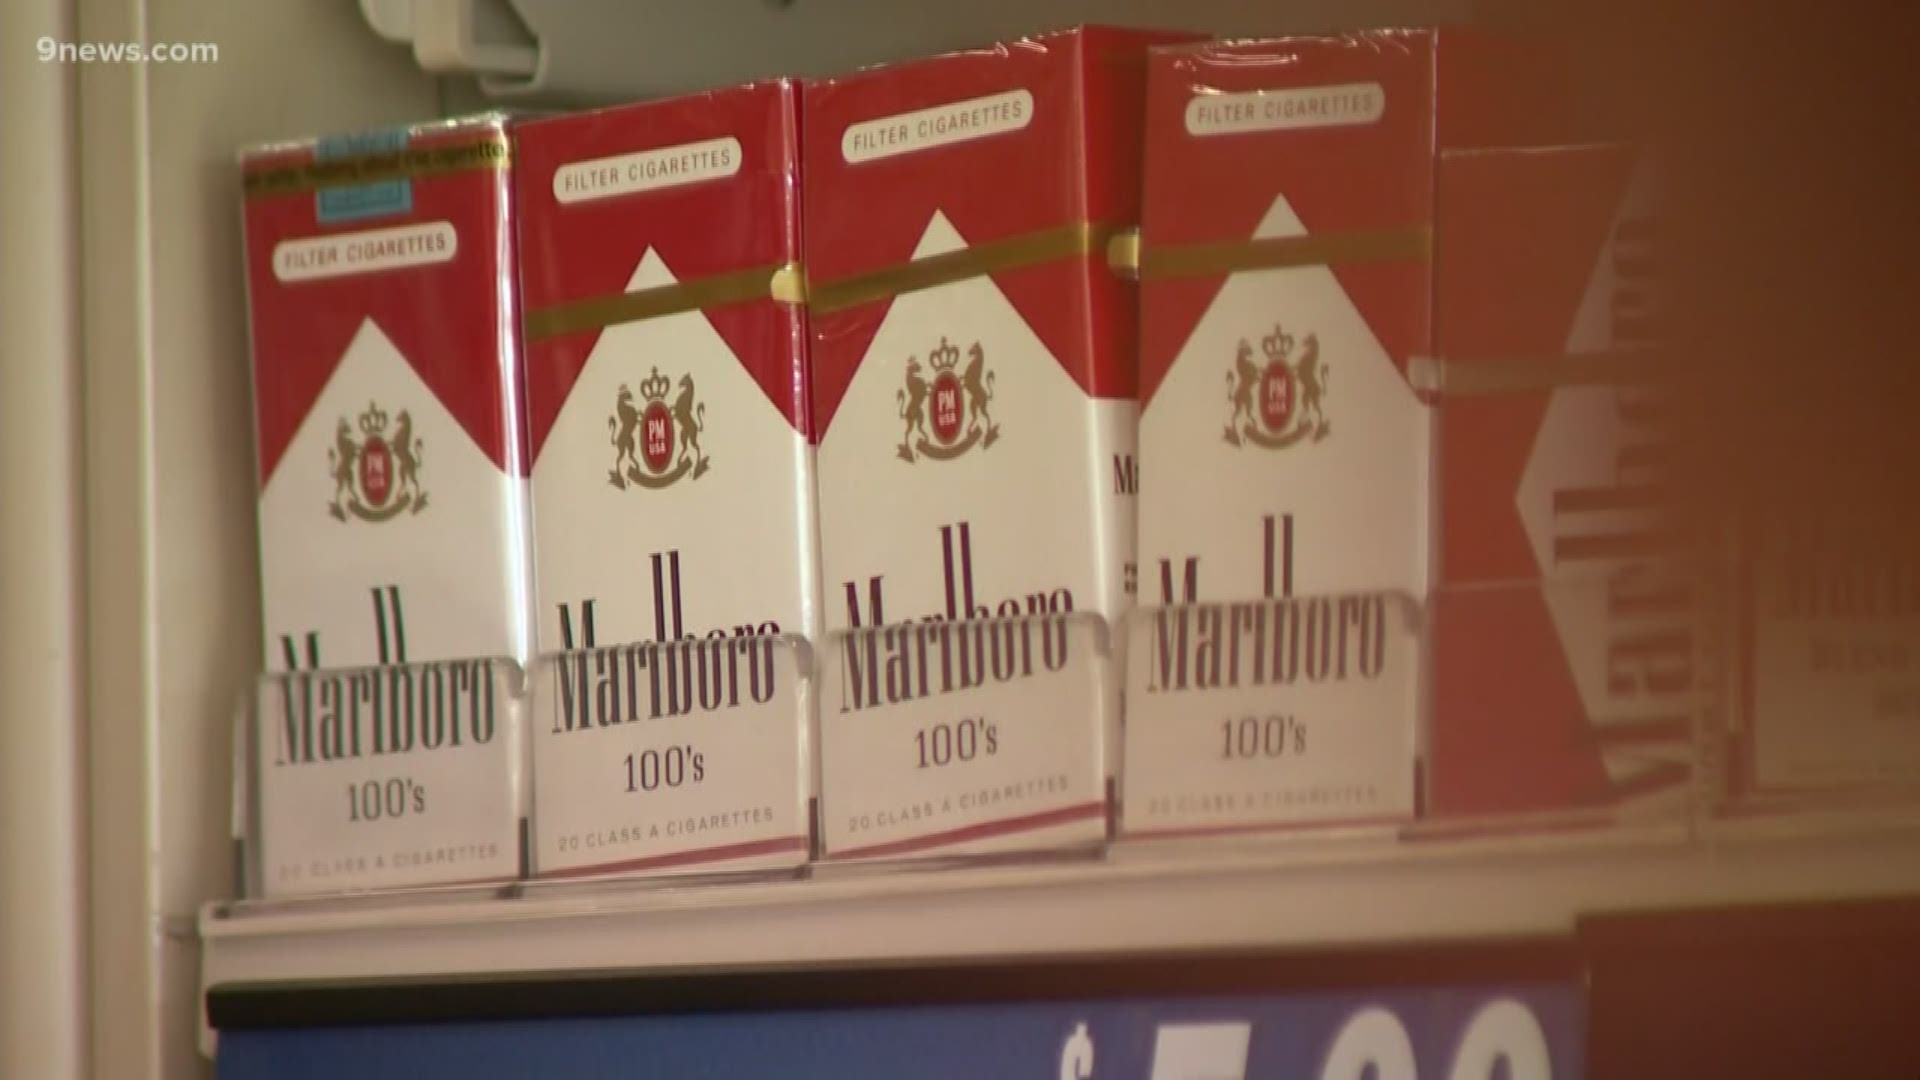 The measure raises the minimum age to buy tobacco as well as adds licensing requirements and restrictions on where new stores can be built.